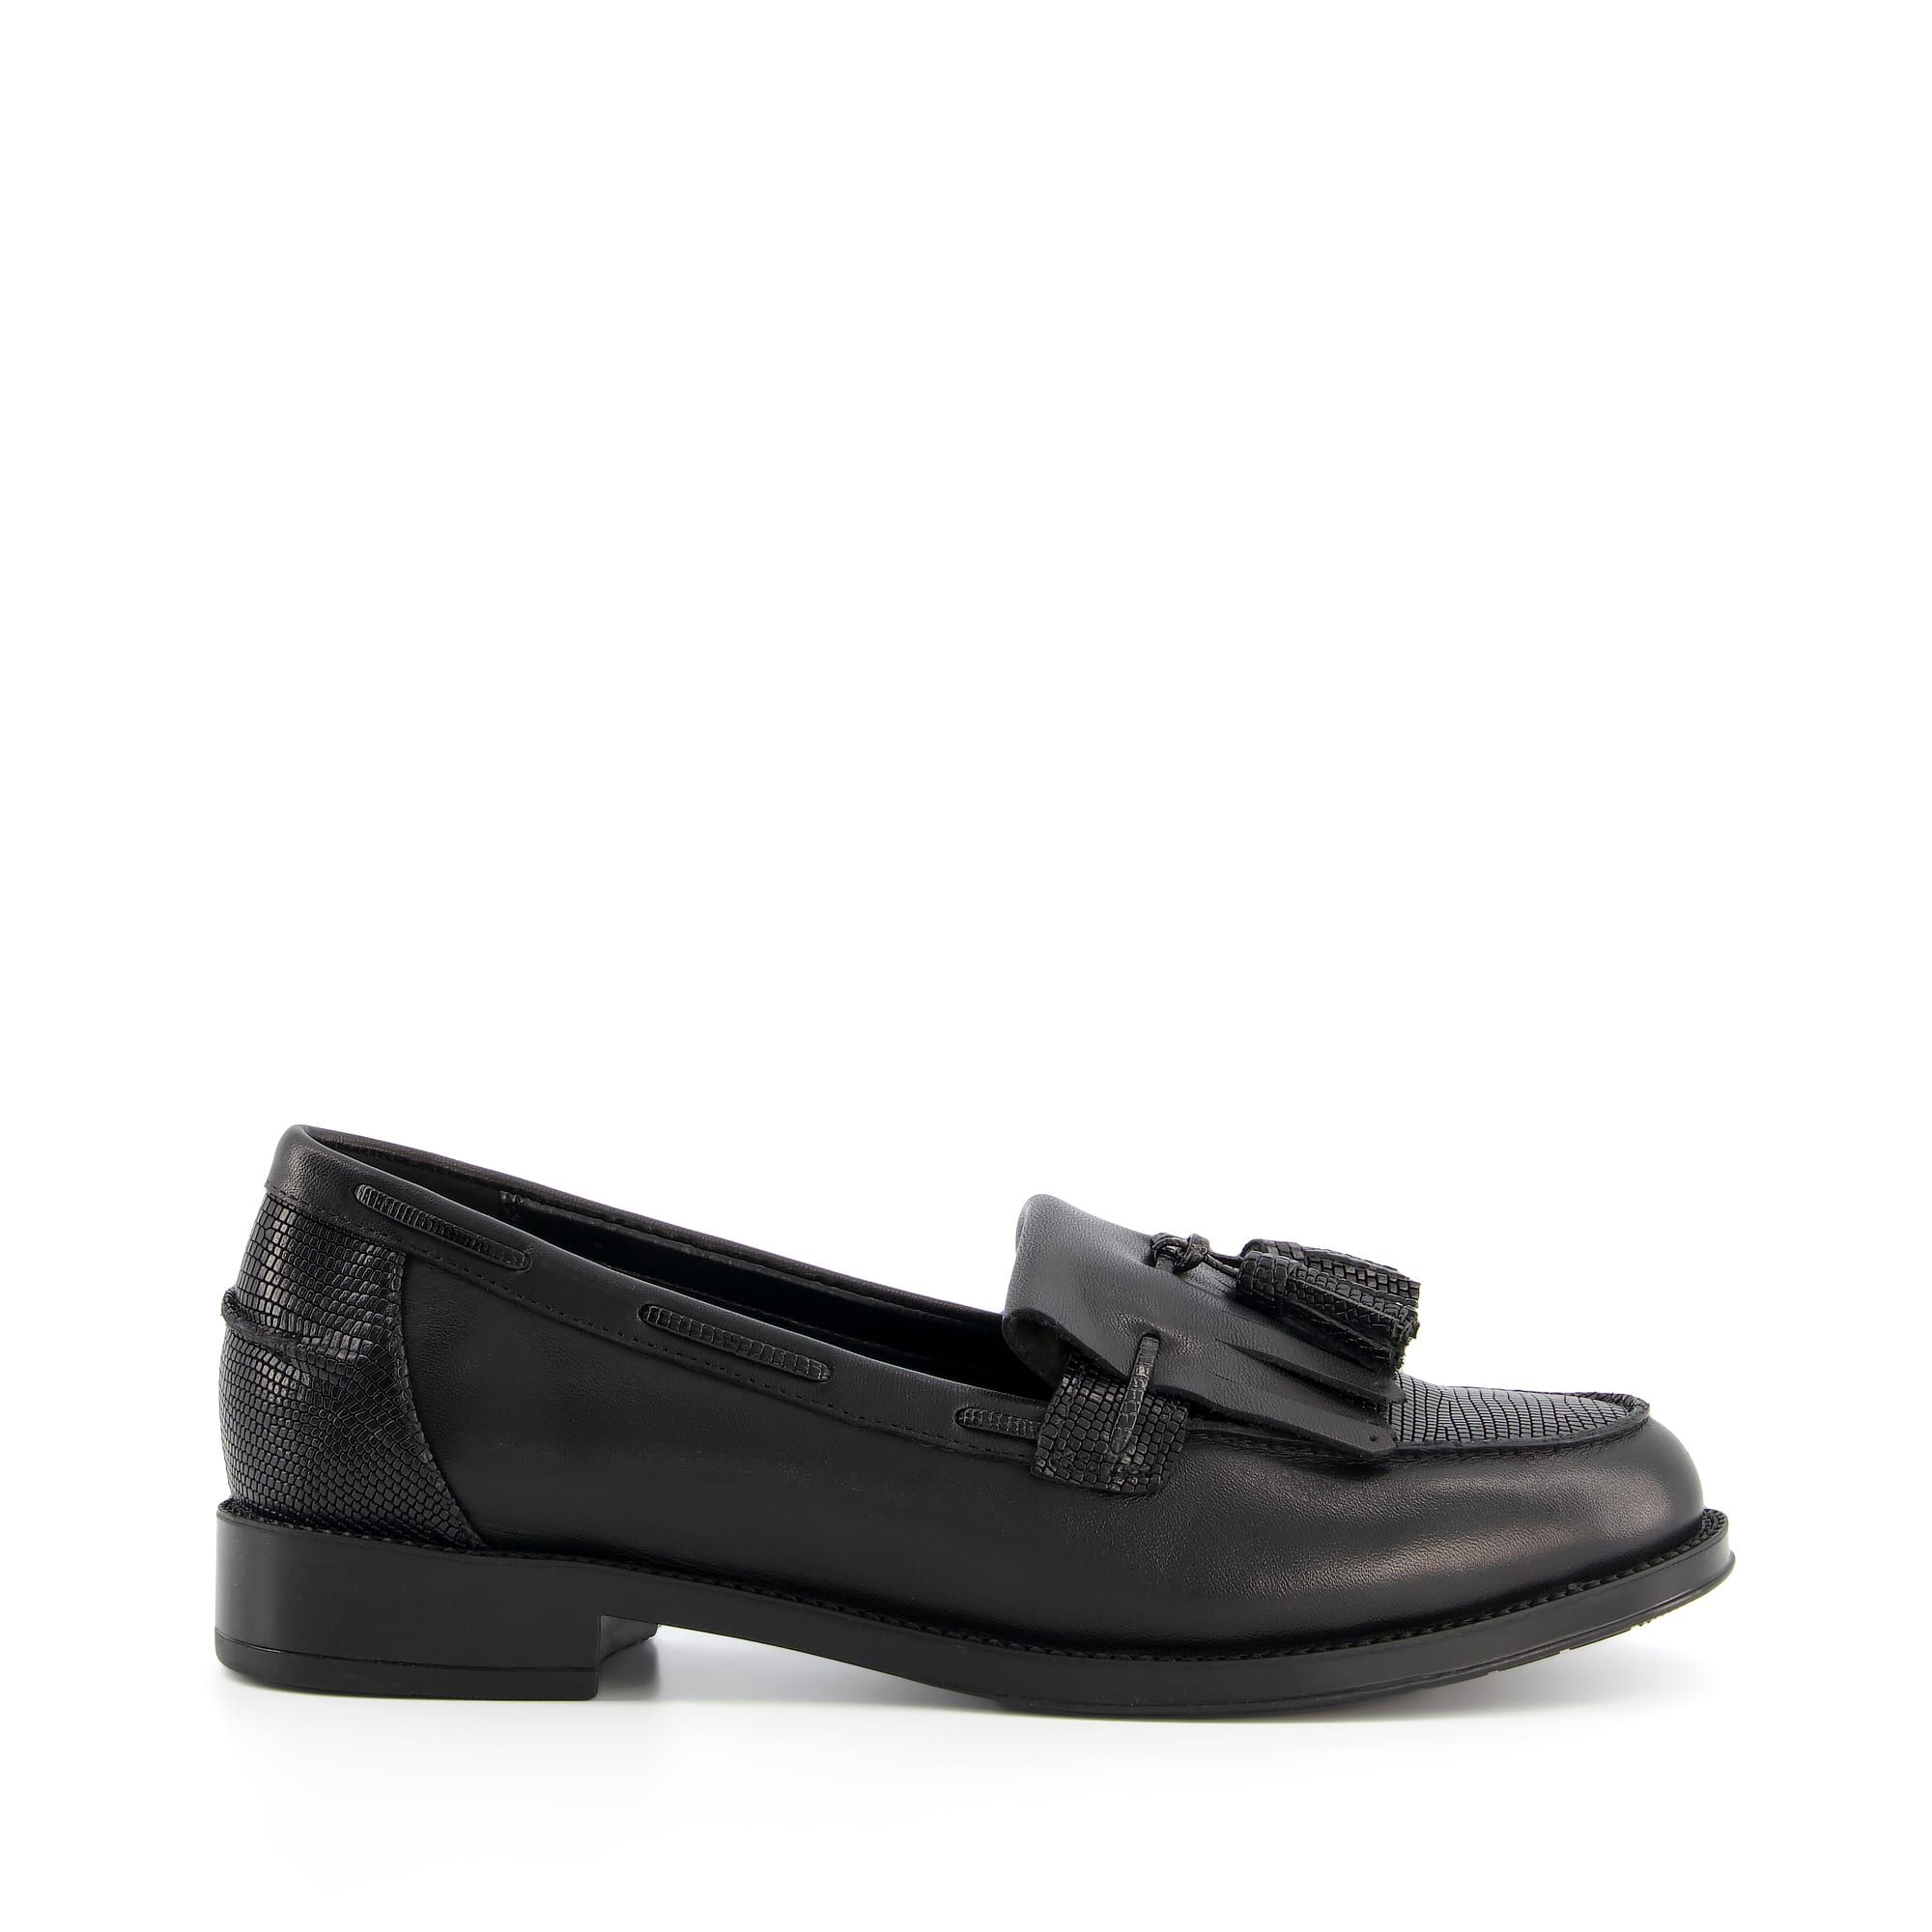 Loafers are a classic for work and weekends, and this style is one of our favourites. Pairing best with preppy looks, this smart pair features textured panels and a tassel trim.